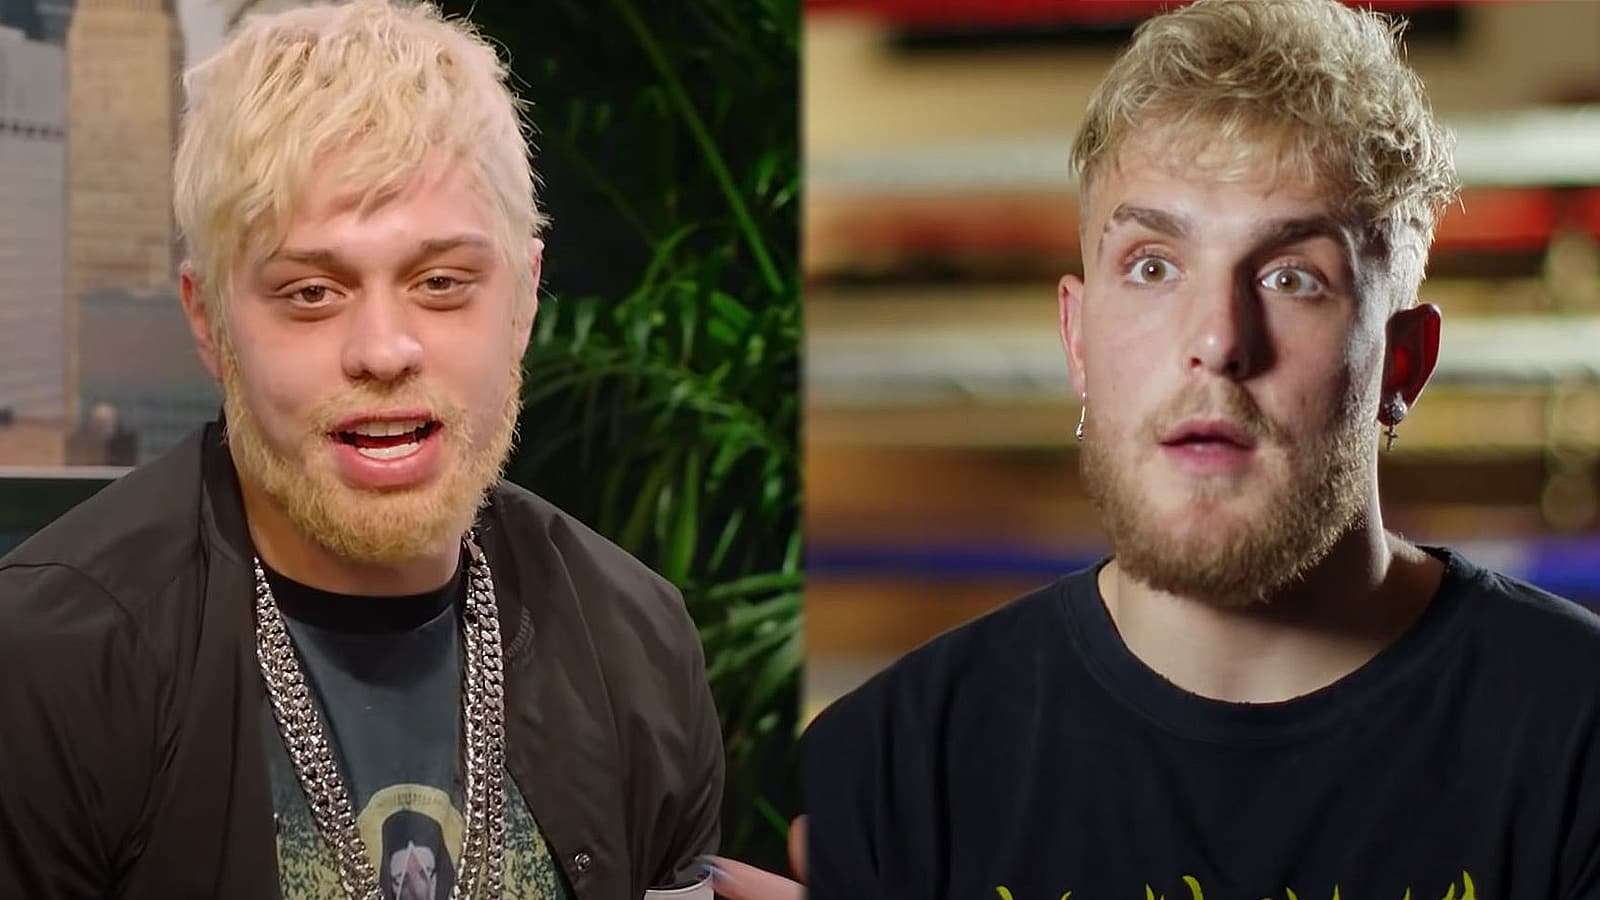 Jake Paul hits out at Pete Davidson over SNL sketch